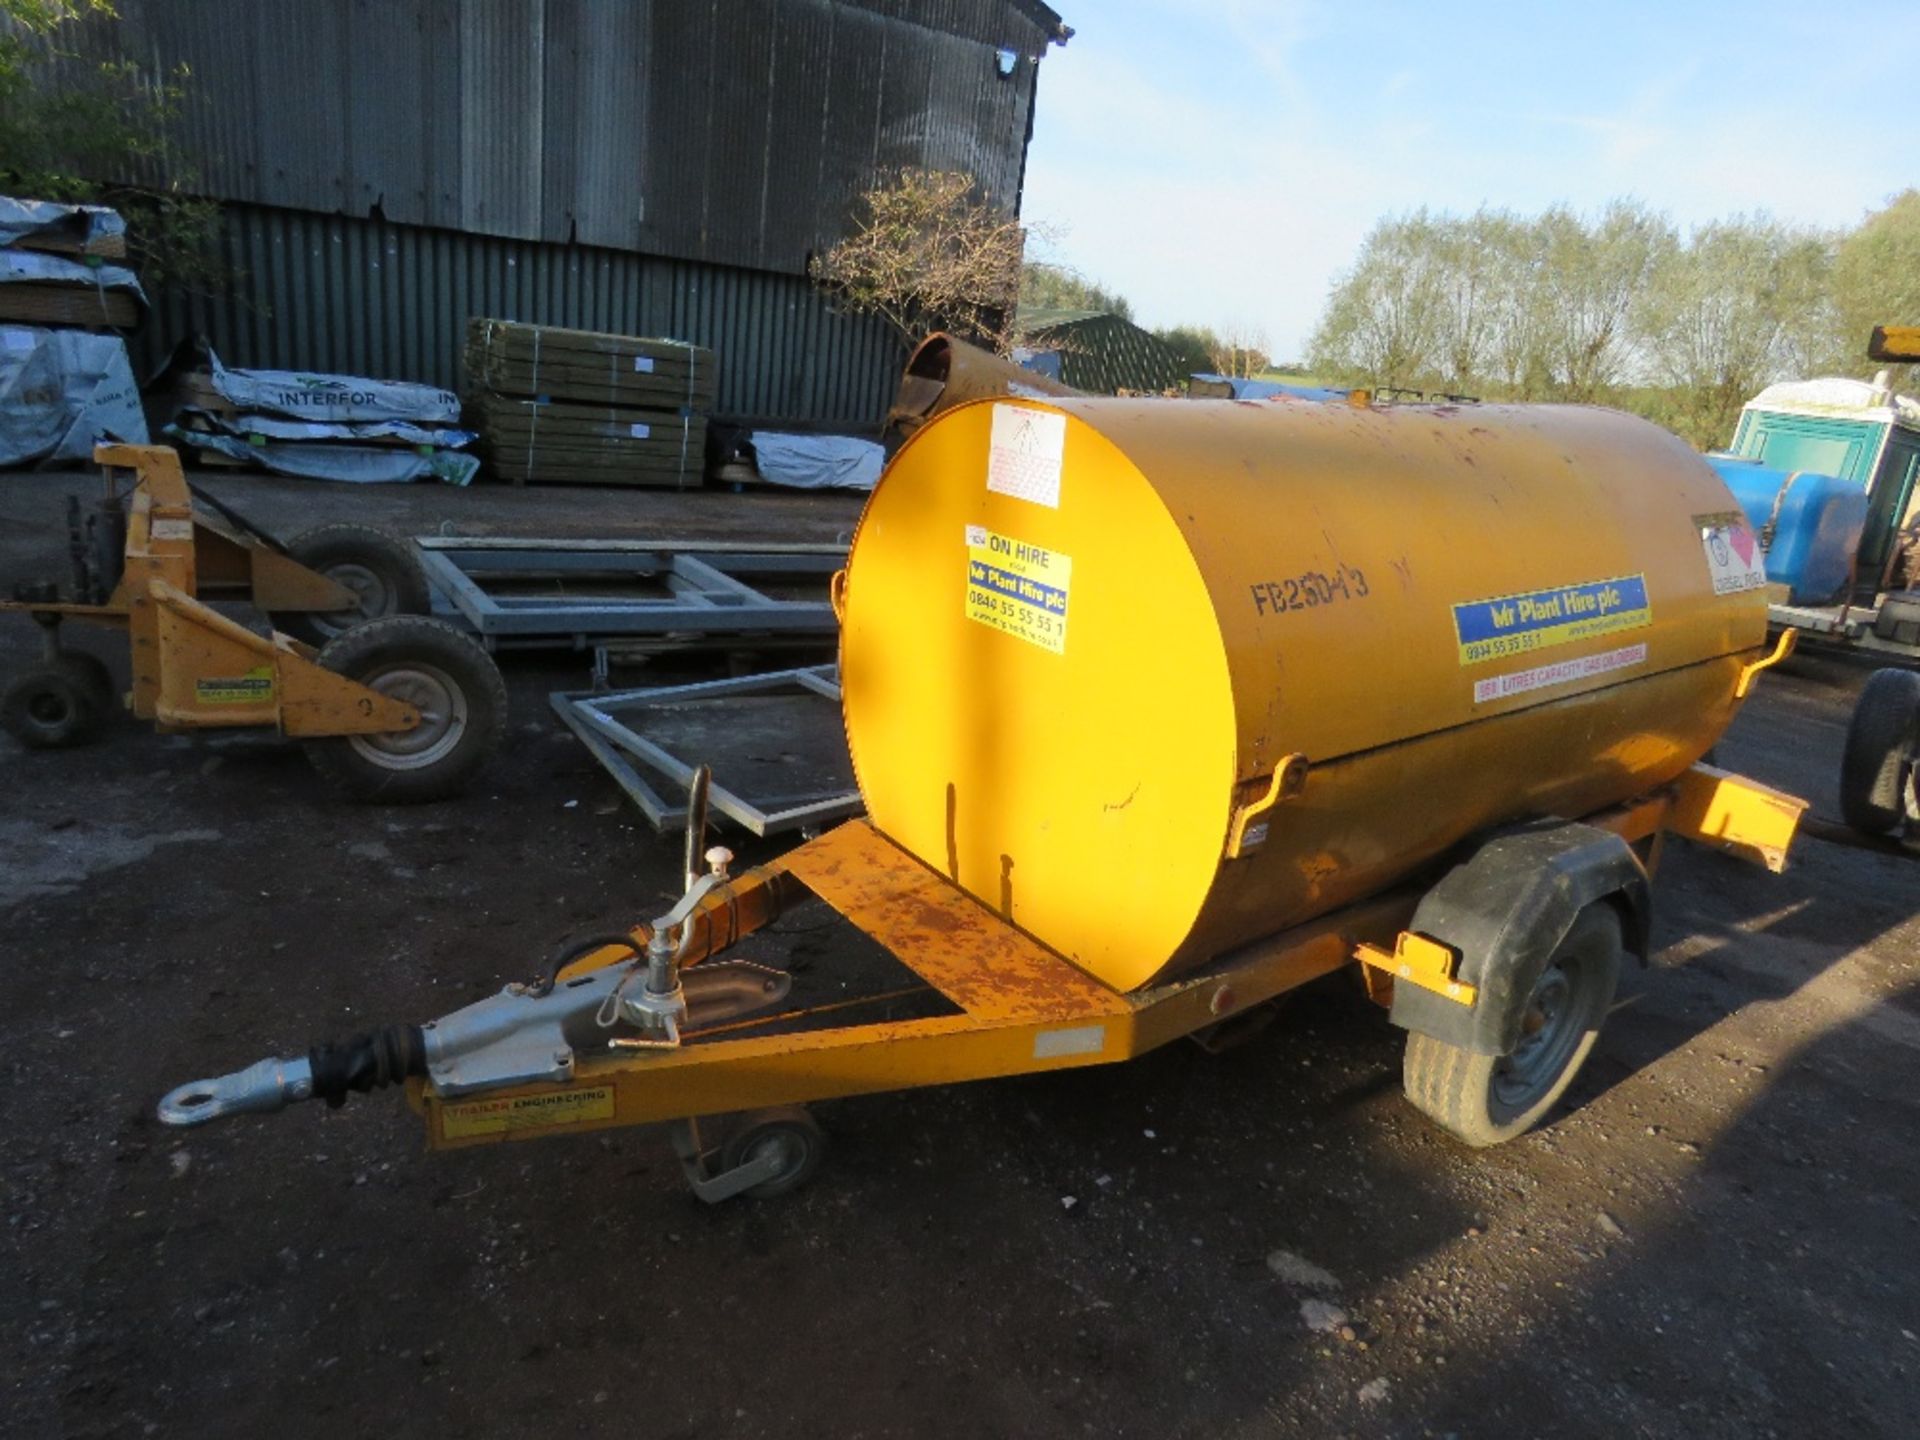 TRAILER ENGINEERING 950 LITRE DIESEL BOWSER, WITH PUMP AND HOSE. FAST TOW, RING HITCH FITTED.